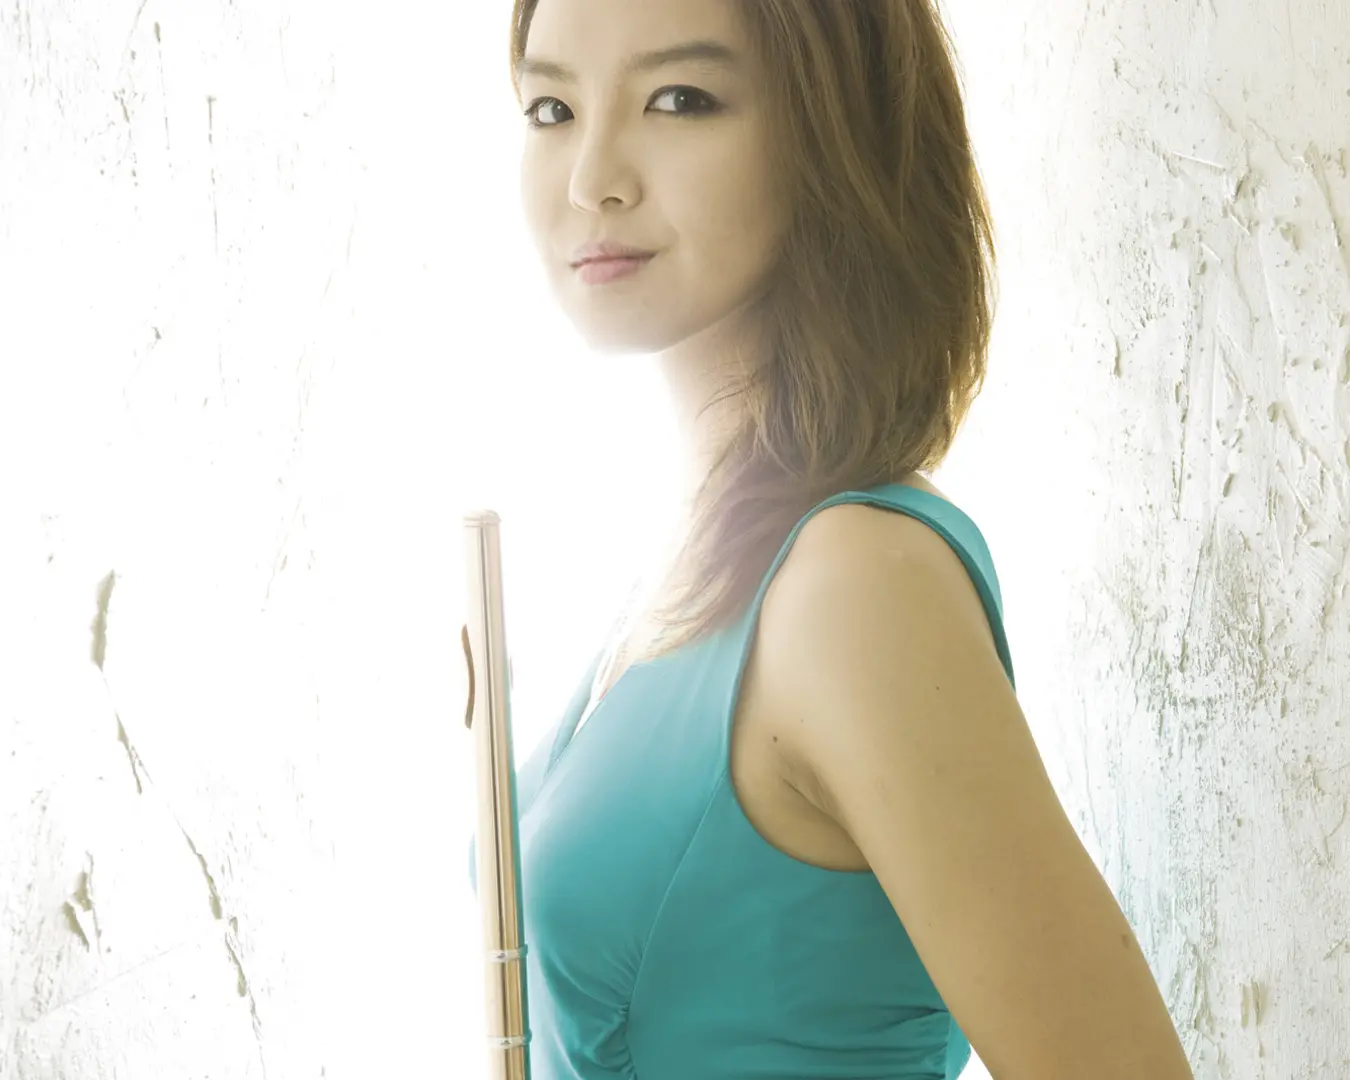 Flutist Jasmine Choi. Photo by Taewook Kang, courtesy of Astral Artists.